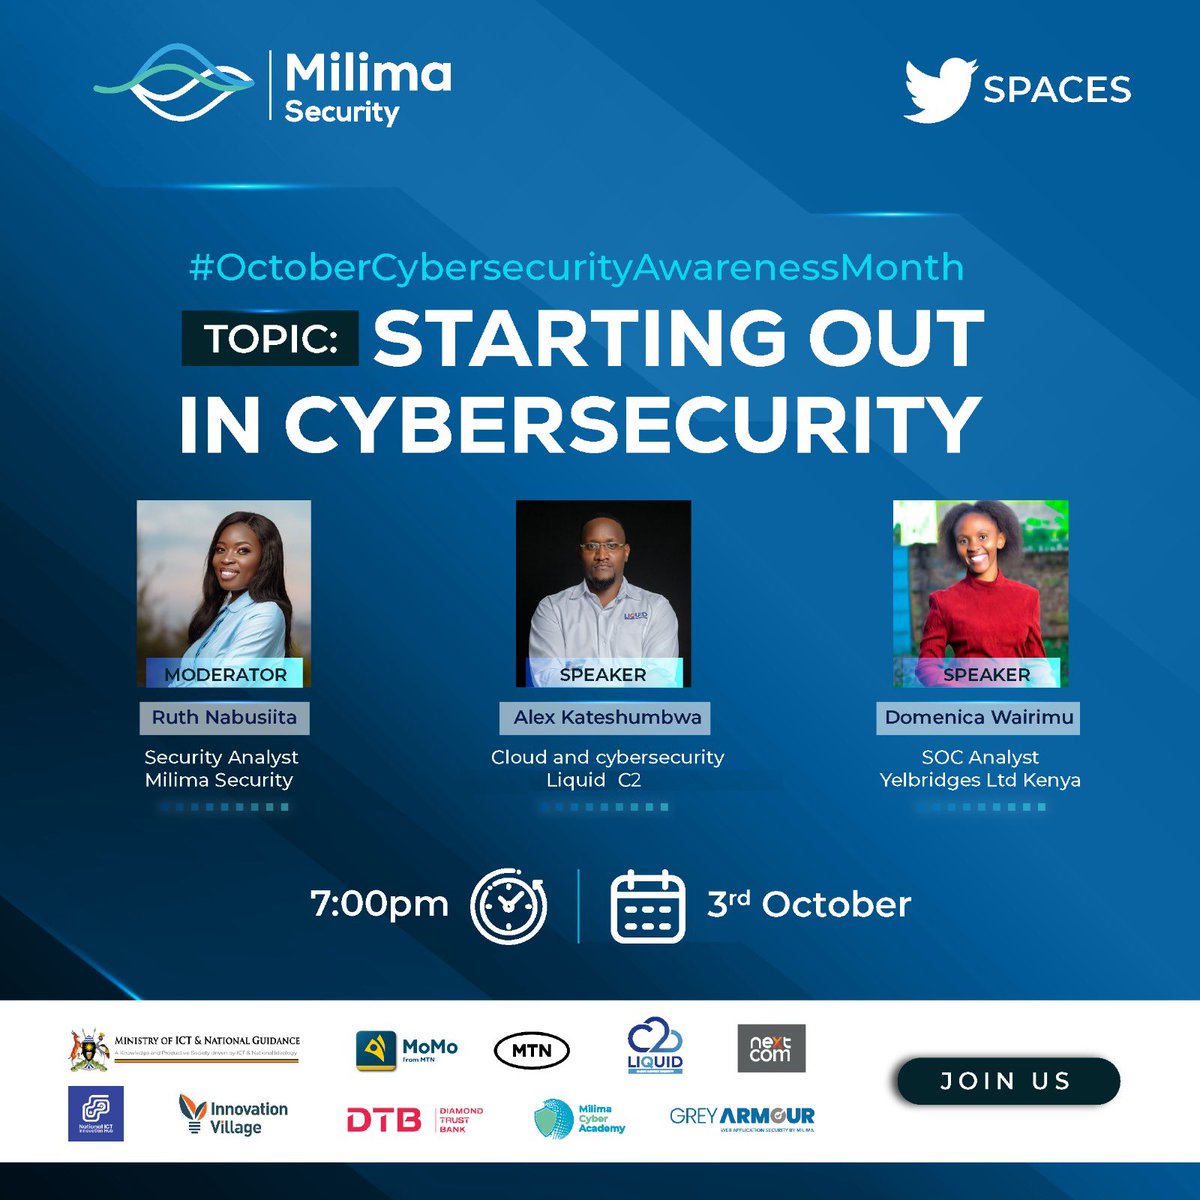 🎙🎙Join us today on Twitter Spaces to explore the world of cybersecurity careers! 

We'll be discussing the latest opportunities in the field & what to expect when starting out.

TOPIC: Starting out in Cybersecurity
TIME: 7:00 pm
Speakers: @a_katesh @WairDomenica
#Cybercareers